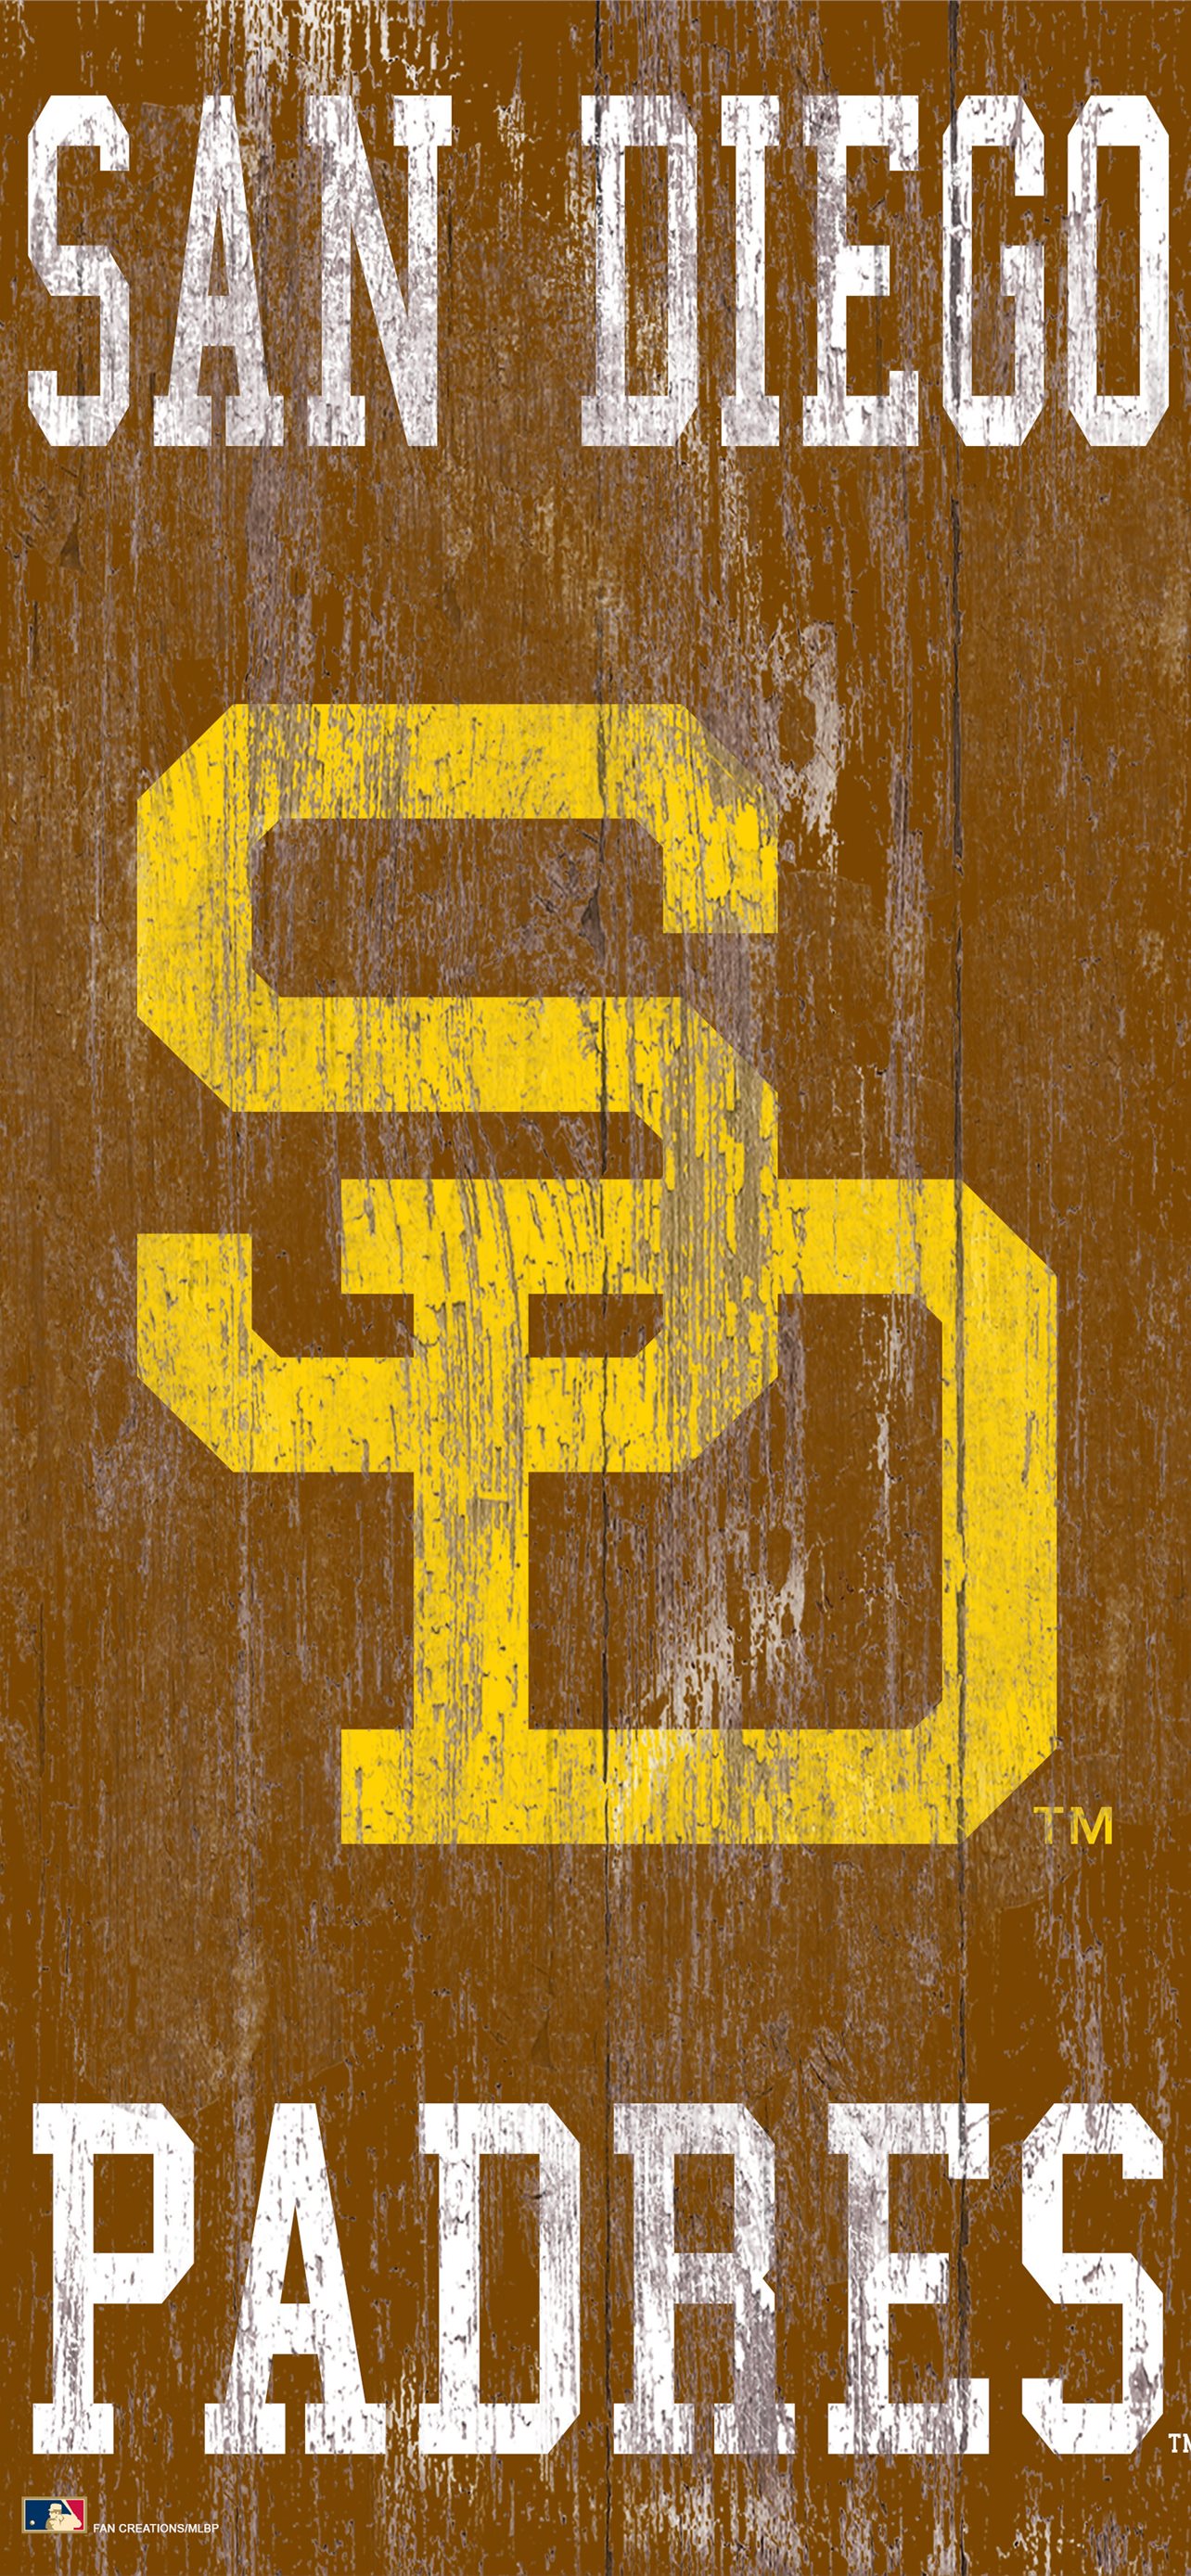 San Diego Padres Wallpapers  Wallpaper Cave